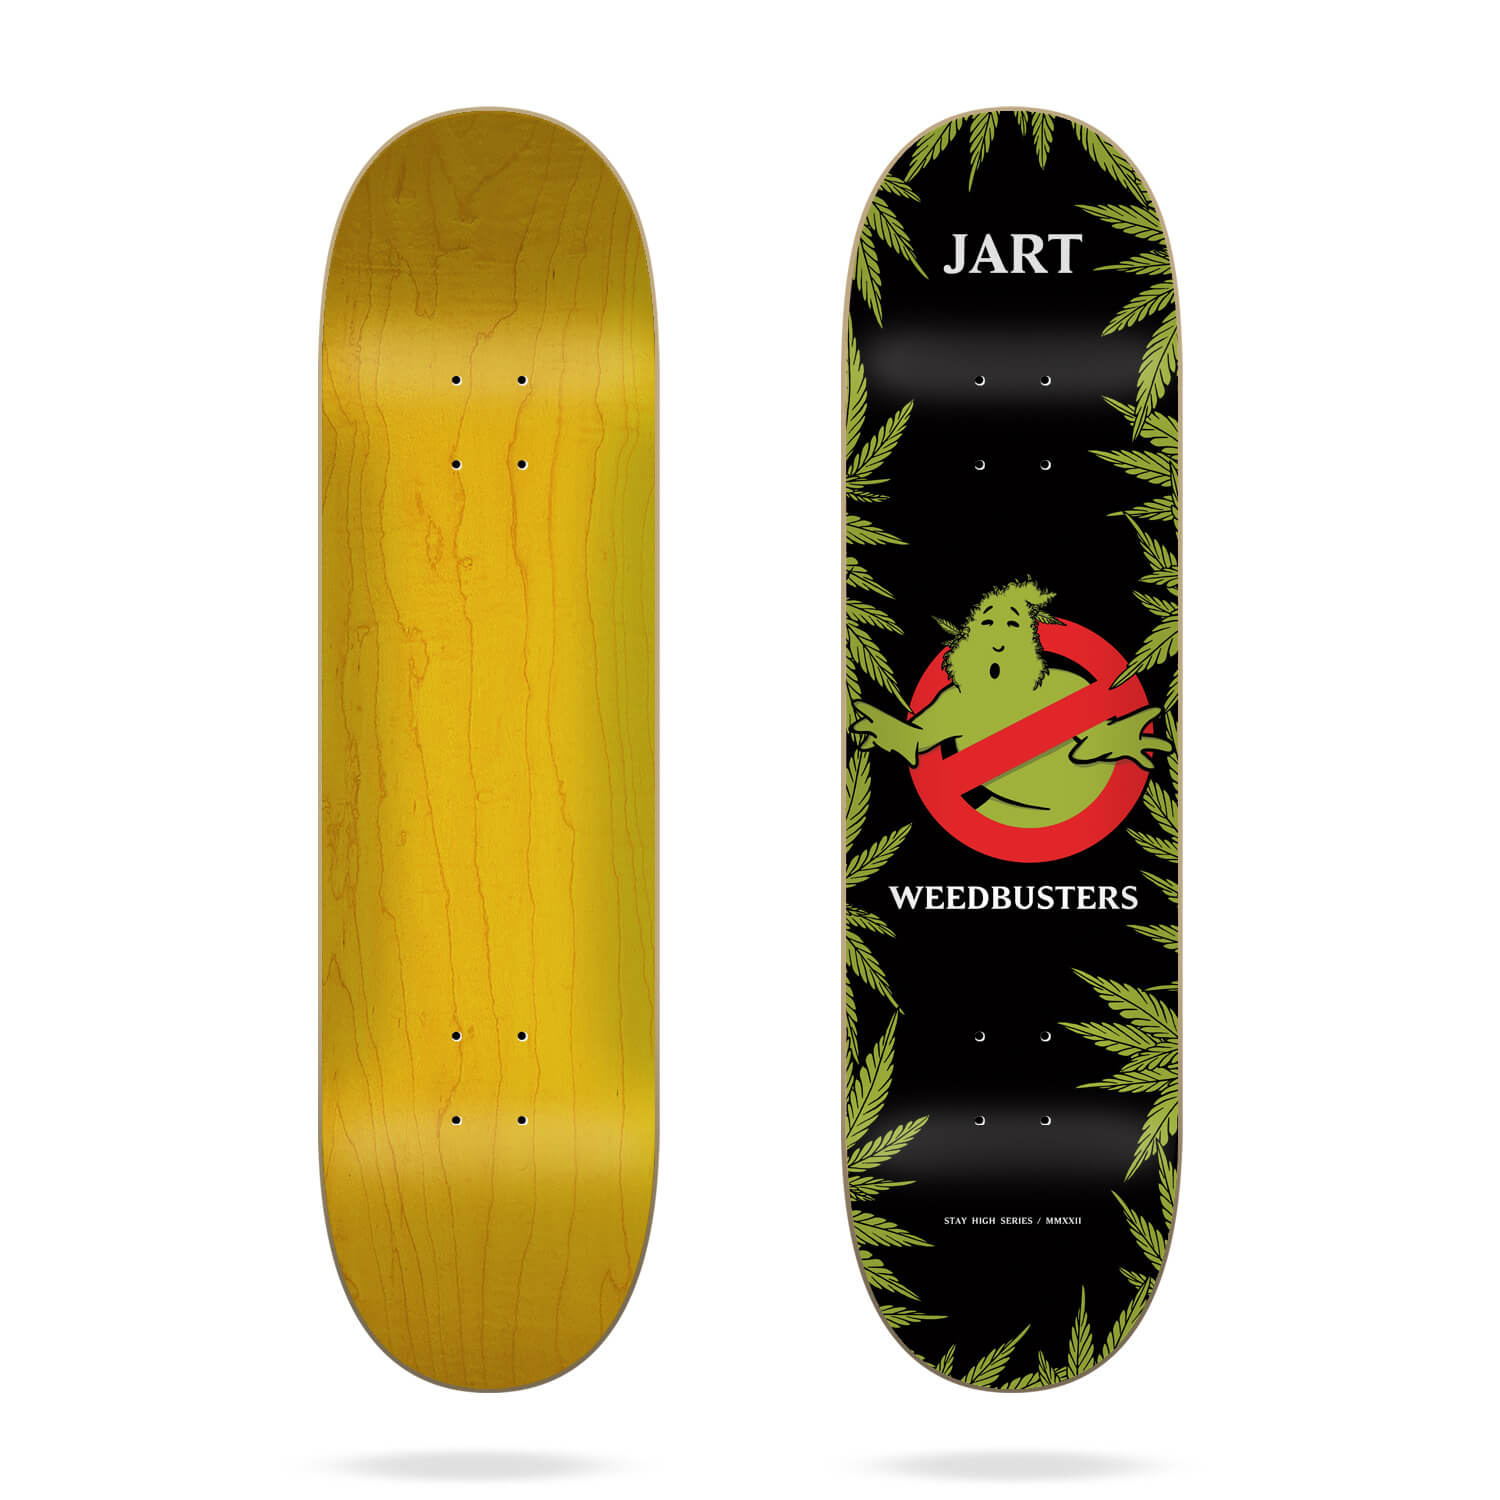 Jart Stoned Weed Busters 8.0" Deck